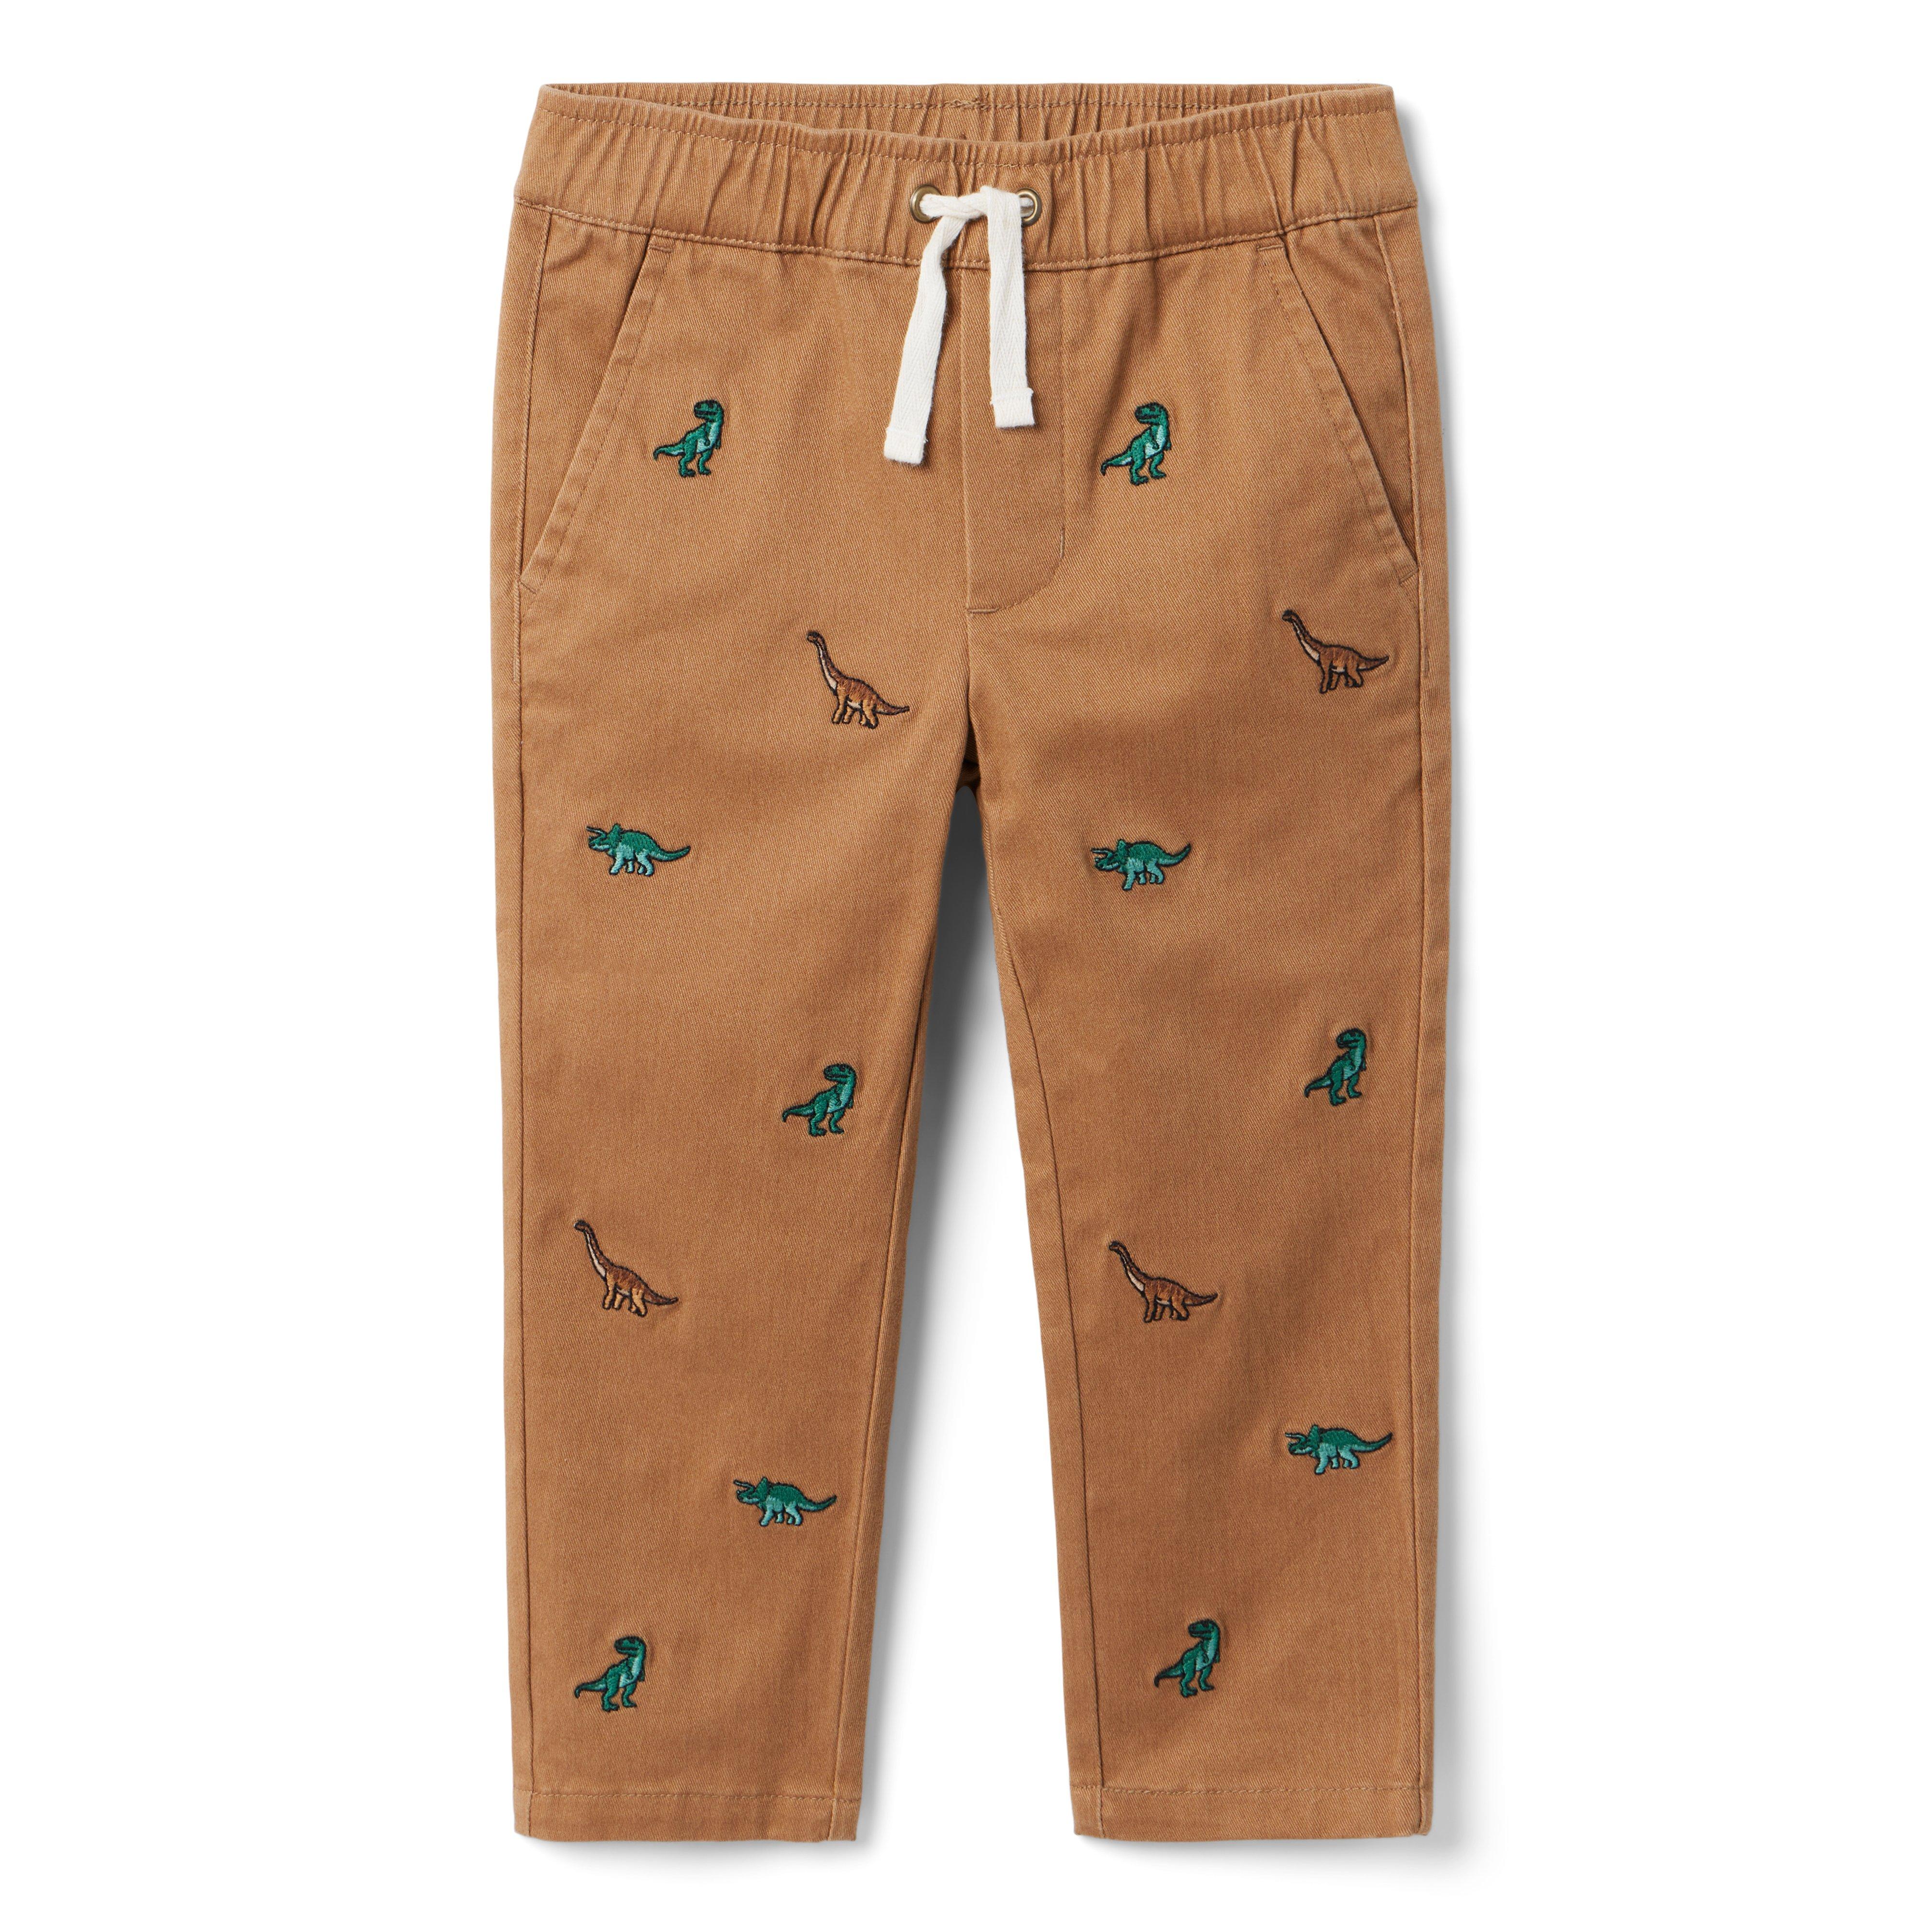 The Embroidered Dinosaur Pant